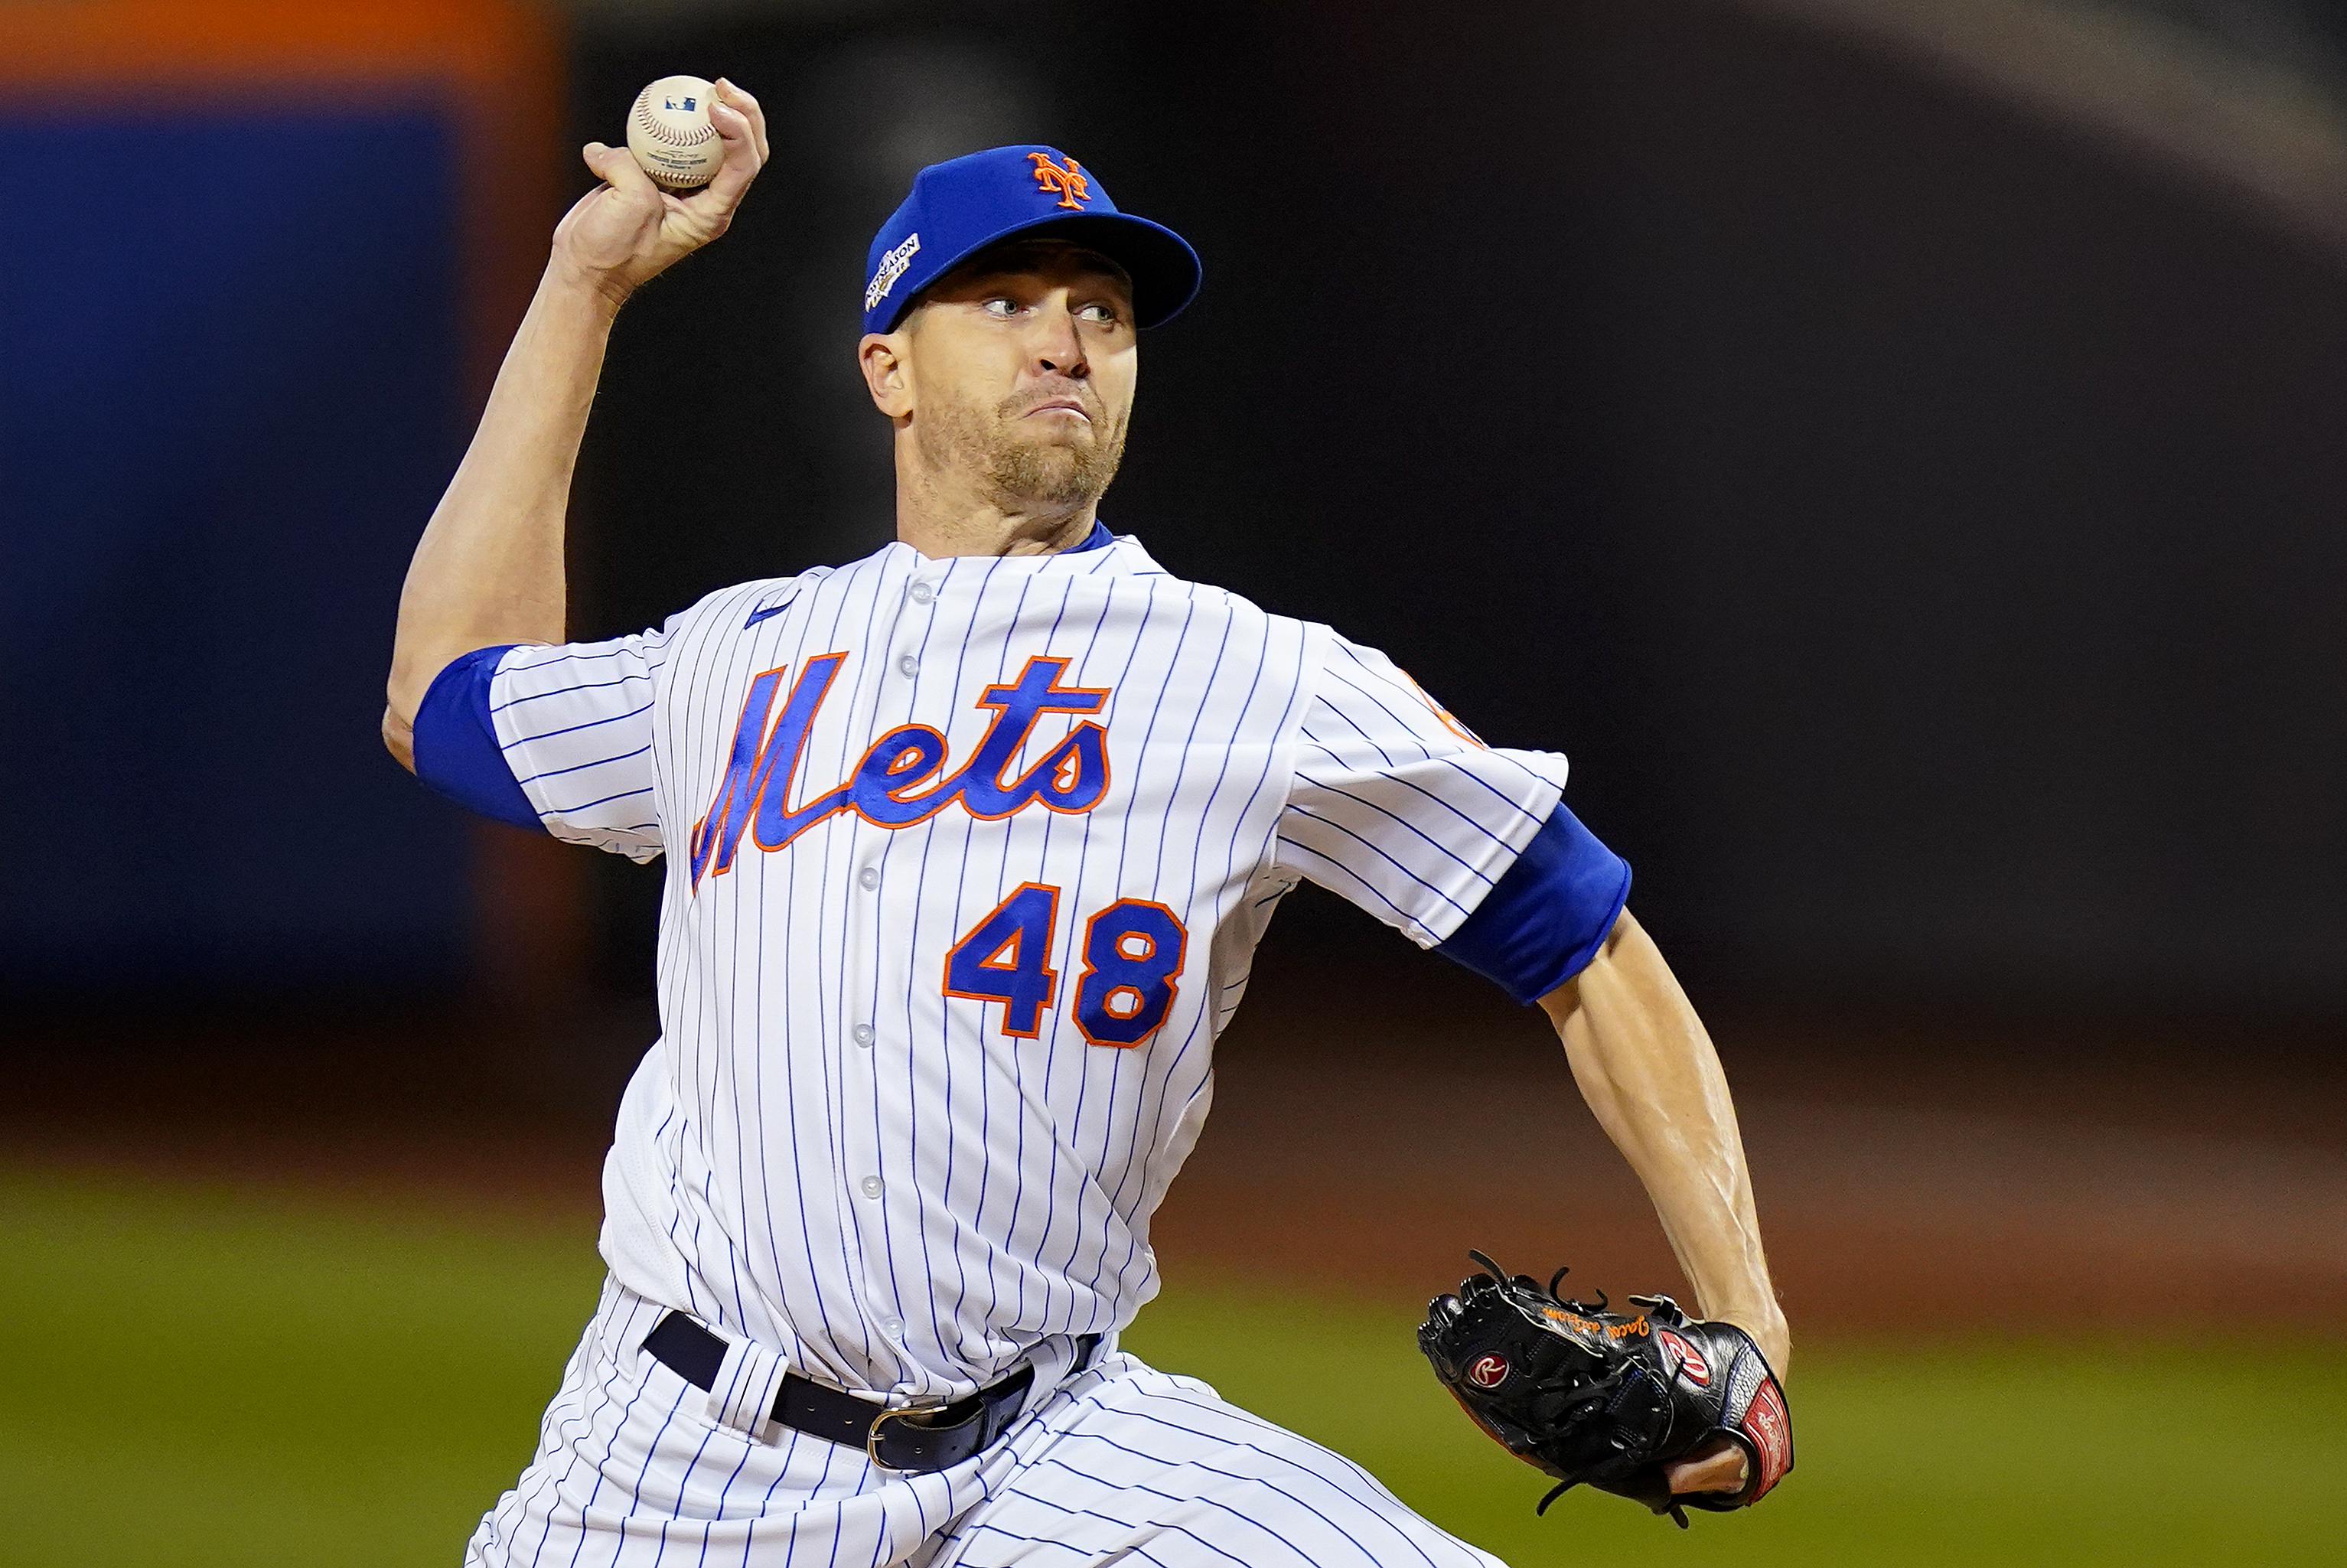 Texas Rangers sign ace Jacob deGrom to $185M, 5-year deal